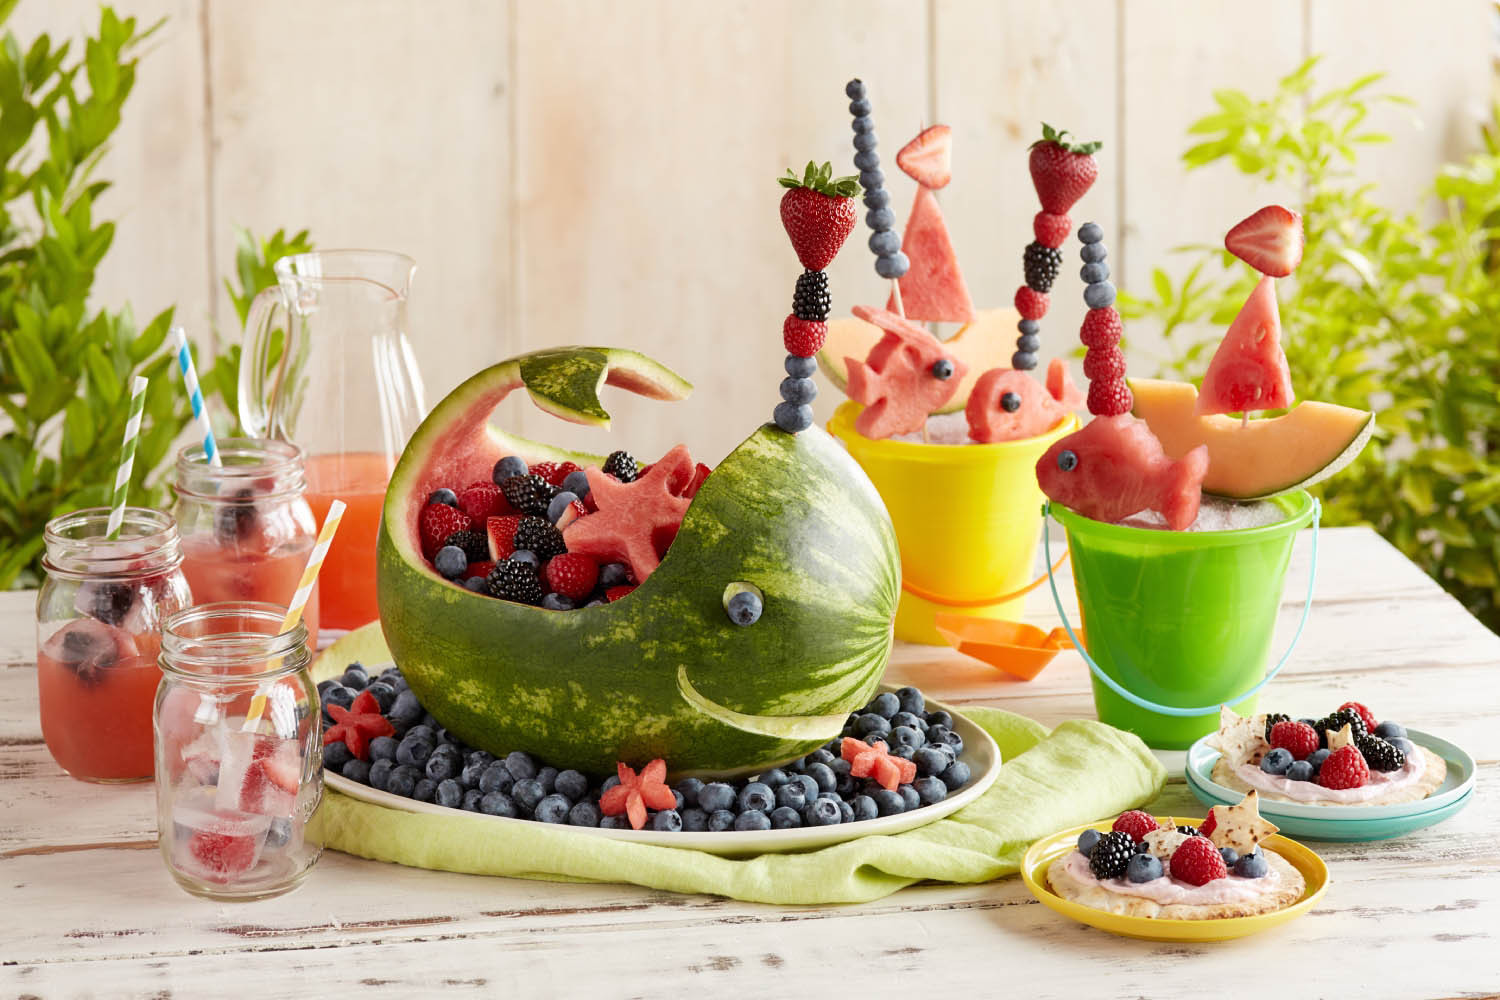 Party At The Beach Ideas
 Splash into Summer with a Berry Beach Party